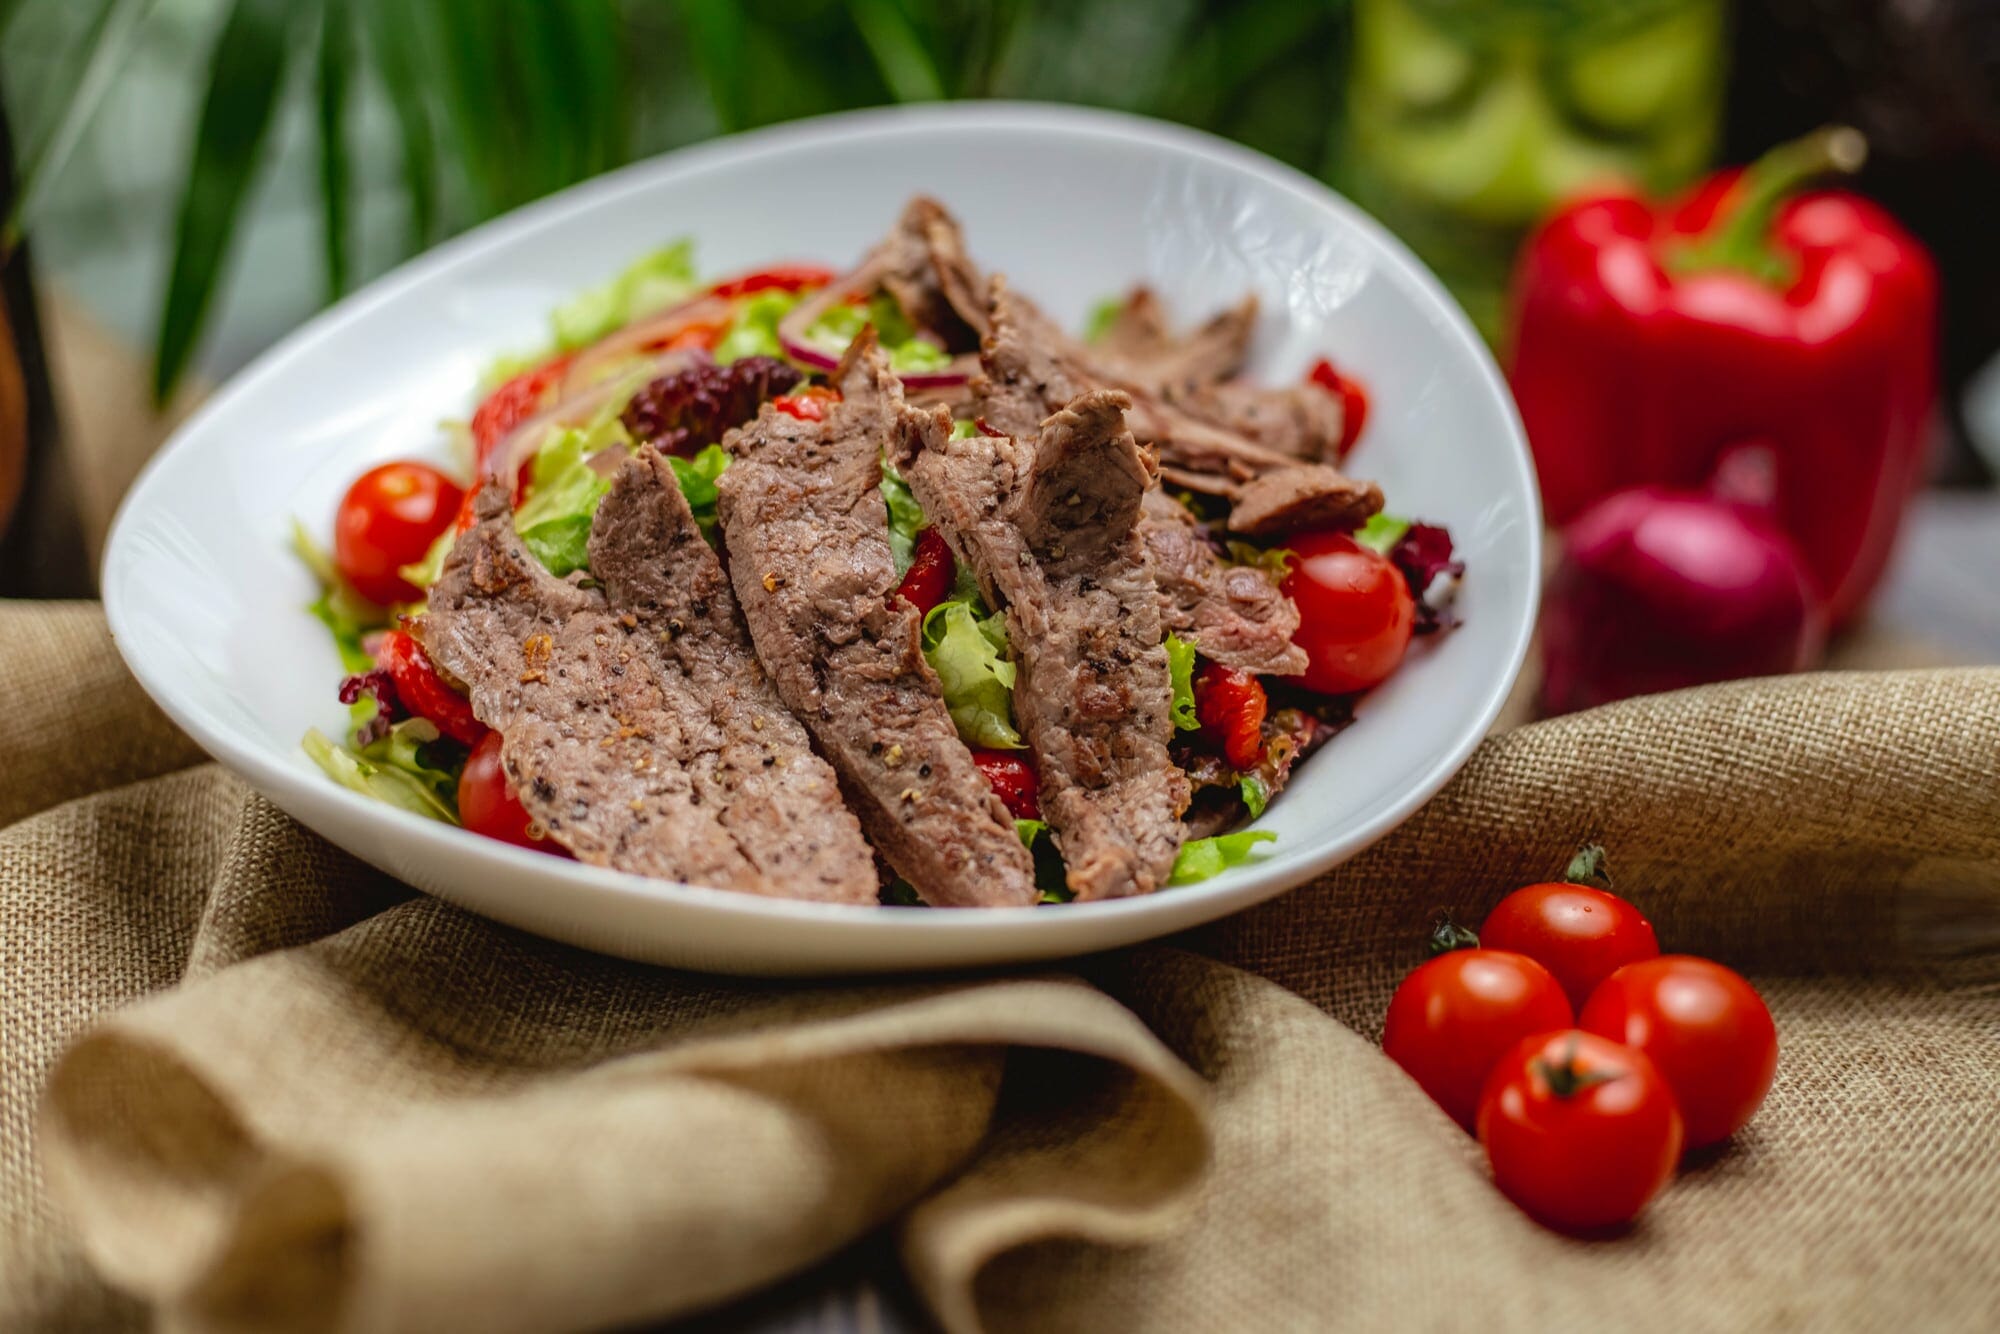 Grass fed beef liver and its health benefits